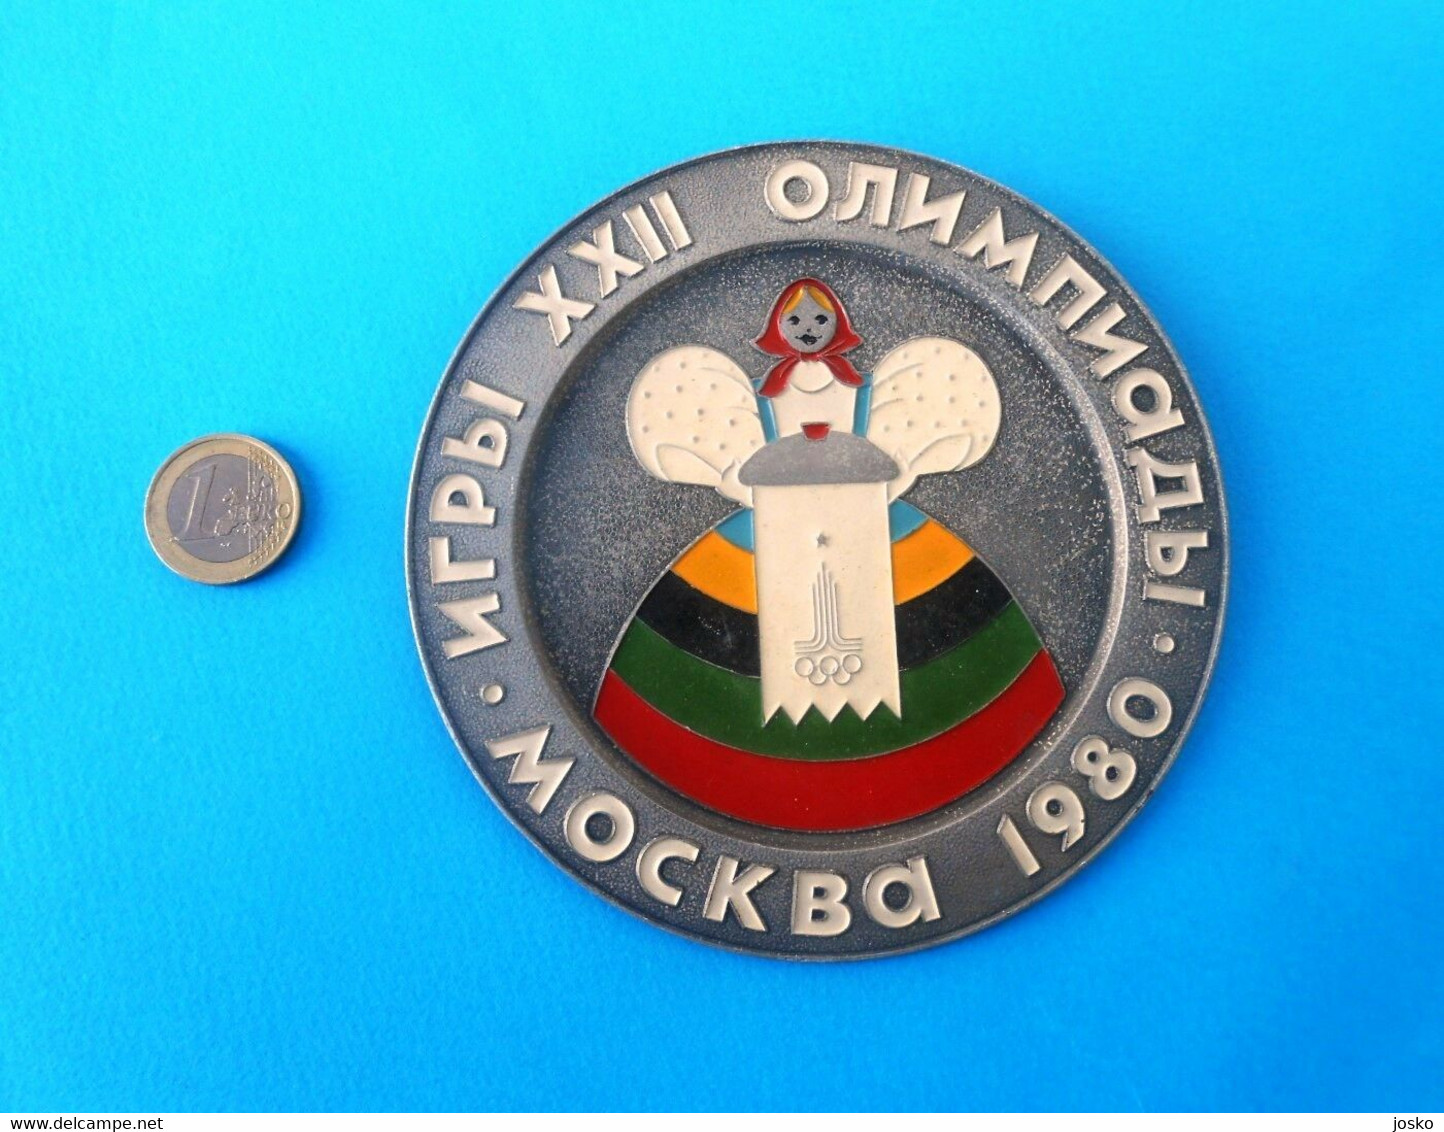 SUMMER OLYMPIC GAMES MOSCOW 1980 - Beautifull Vintage Plate * Olympiad Olympiade Olympia Olimpici Jeux Olympiques - Apparel, Souvenirs & Other